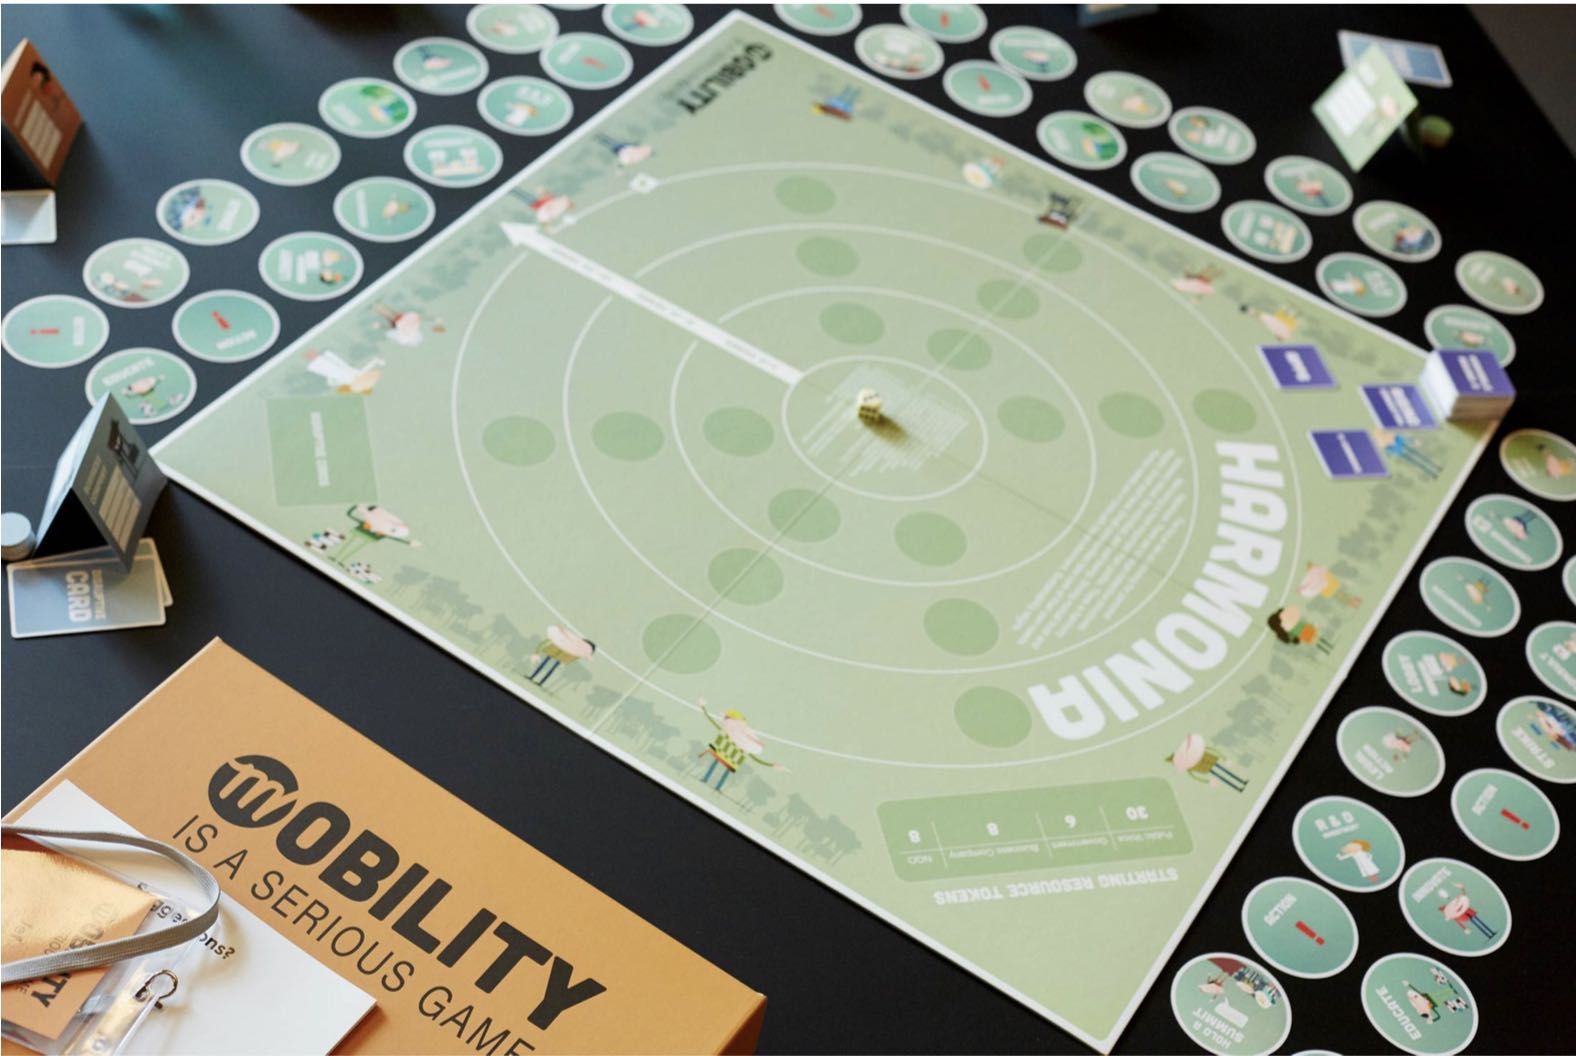 Photo of Mobility is a serous game, boardgame developed by MOBI (2019).